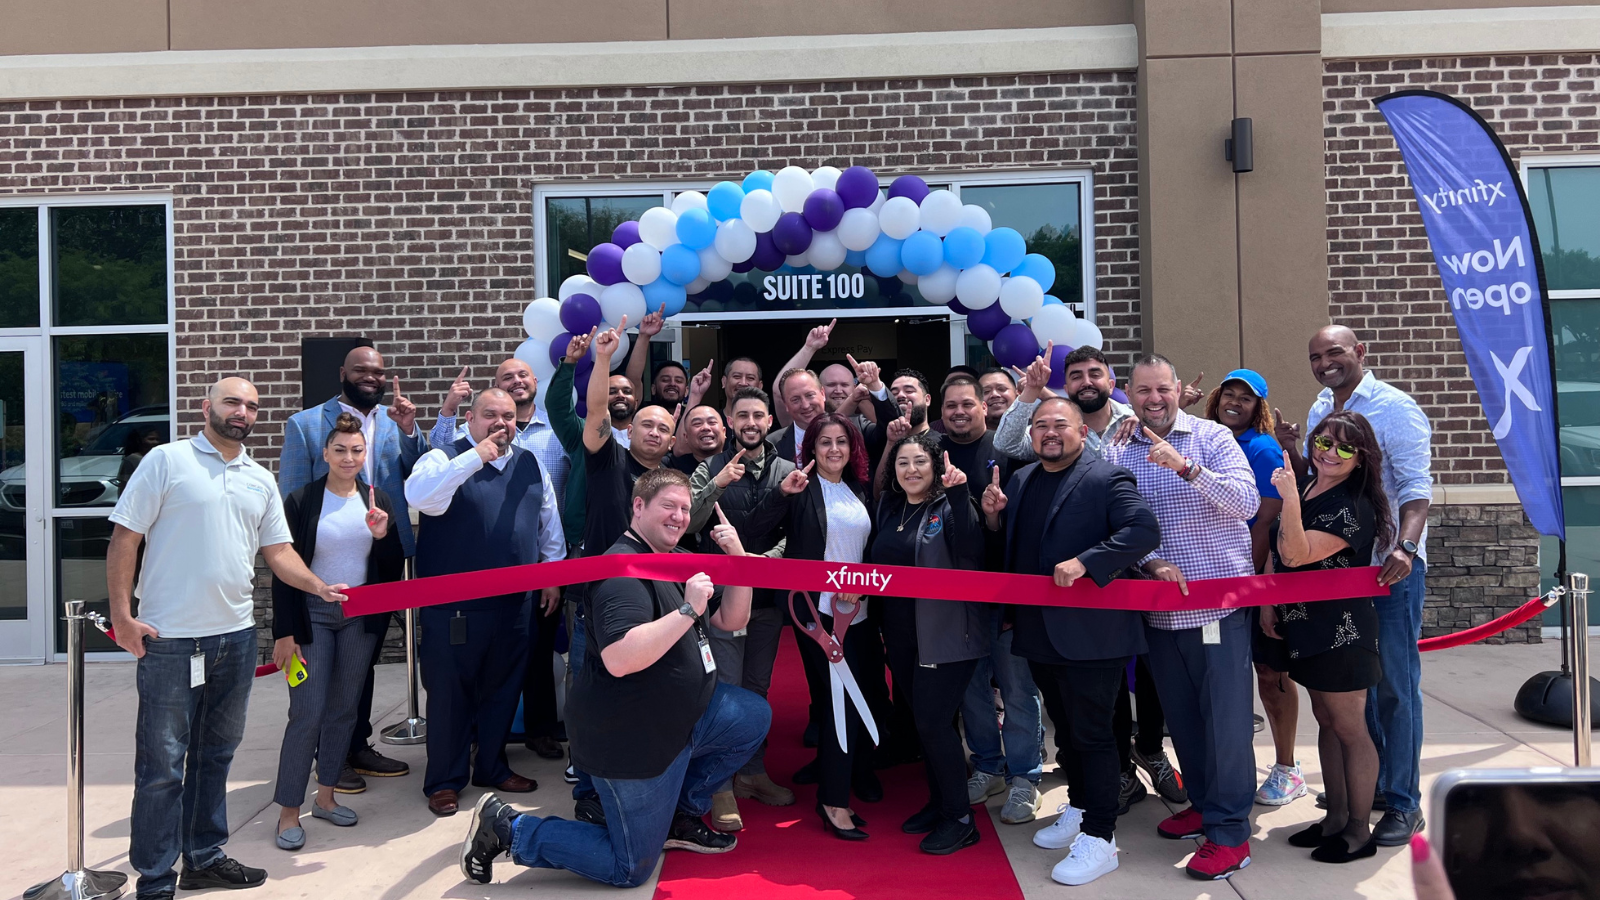 Comcast’s Newest Xfinity Store Opens in Stockton